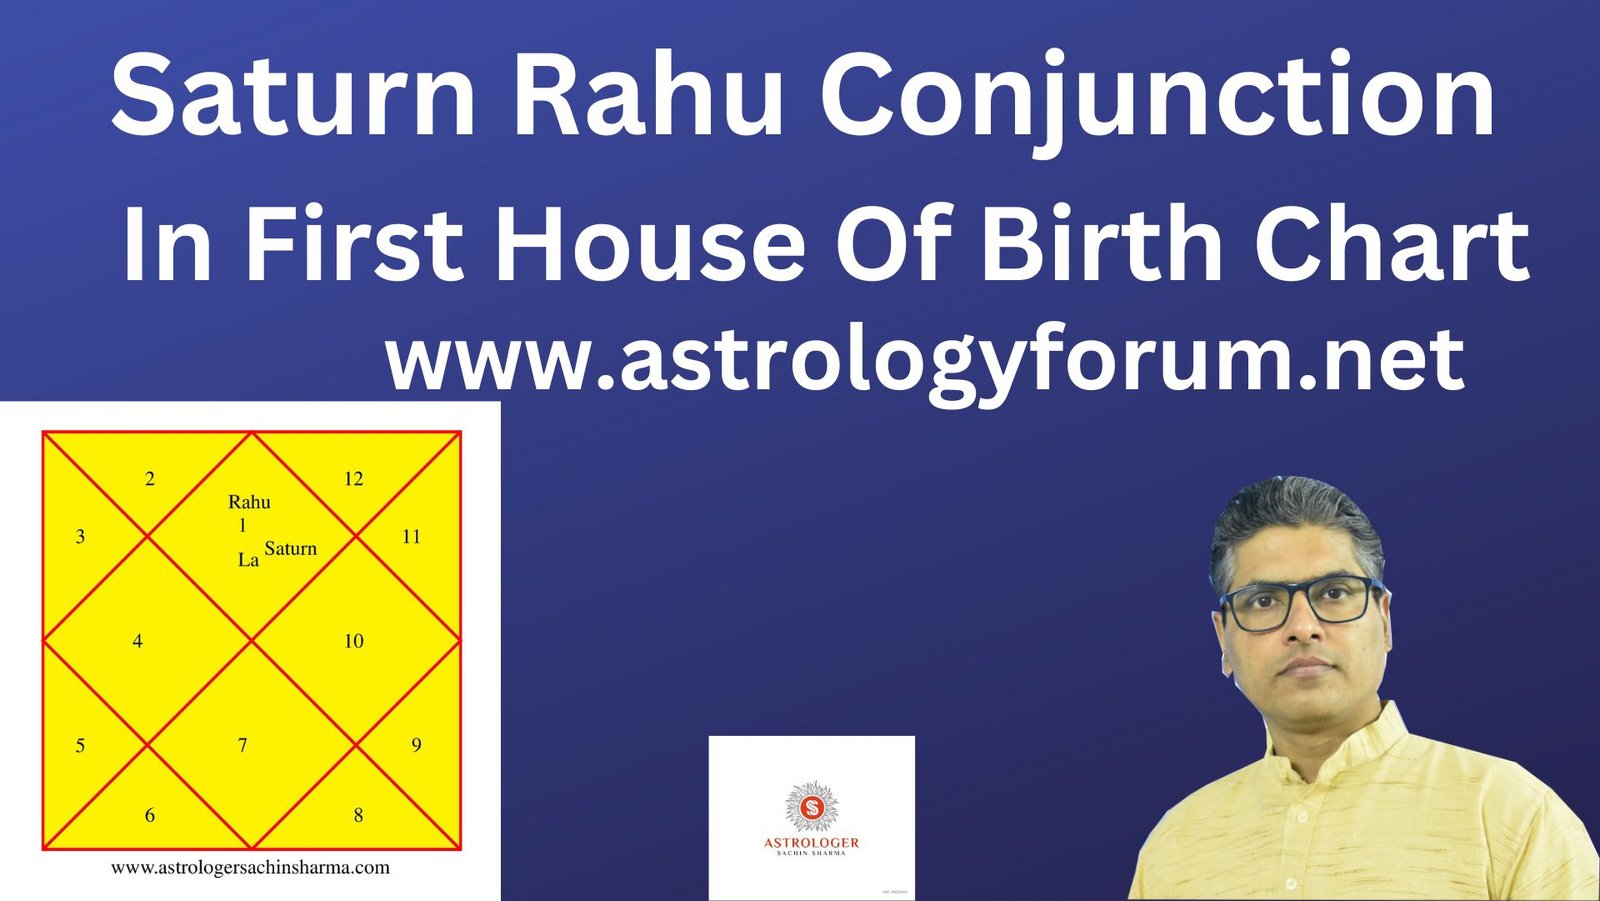 Rahu-Saturn in the first house